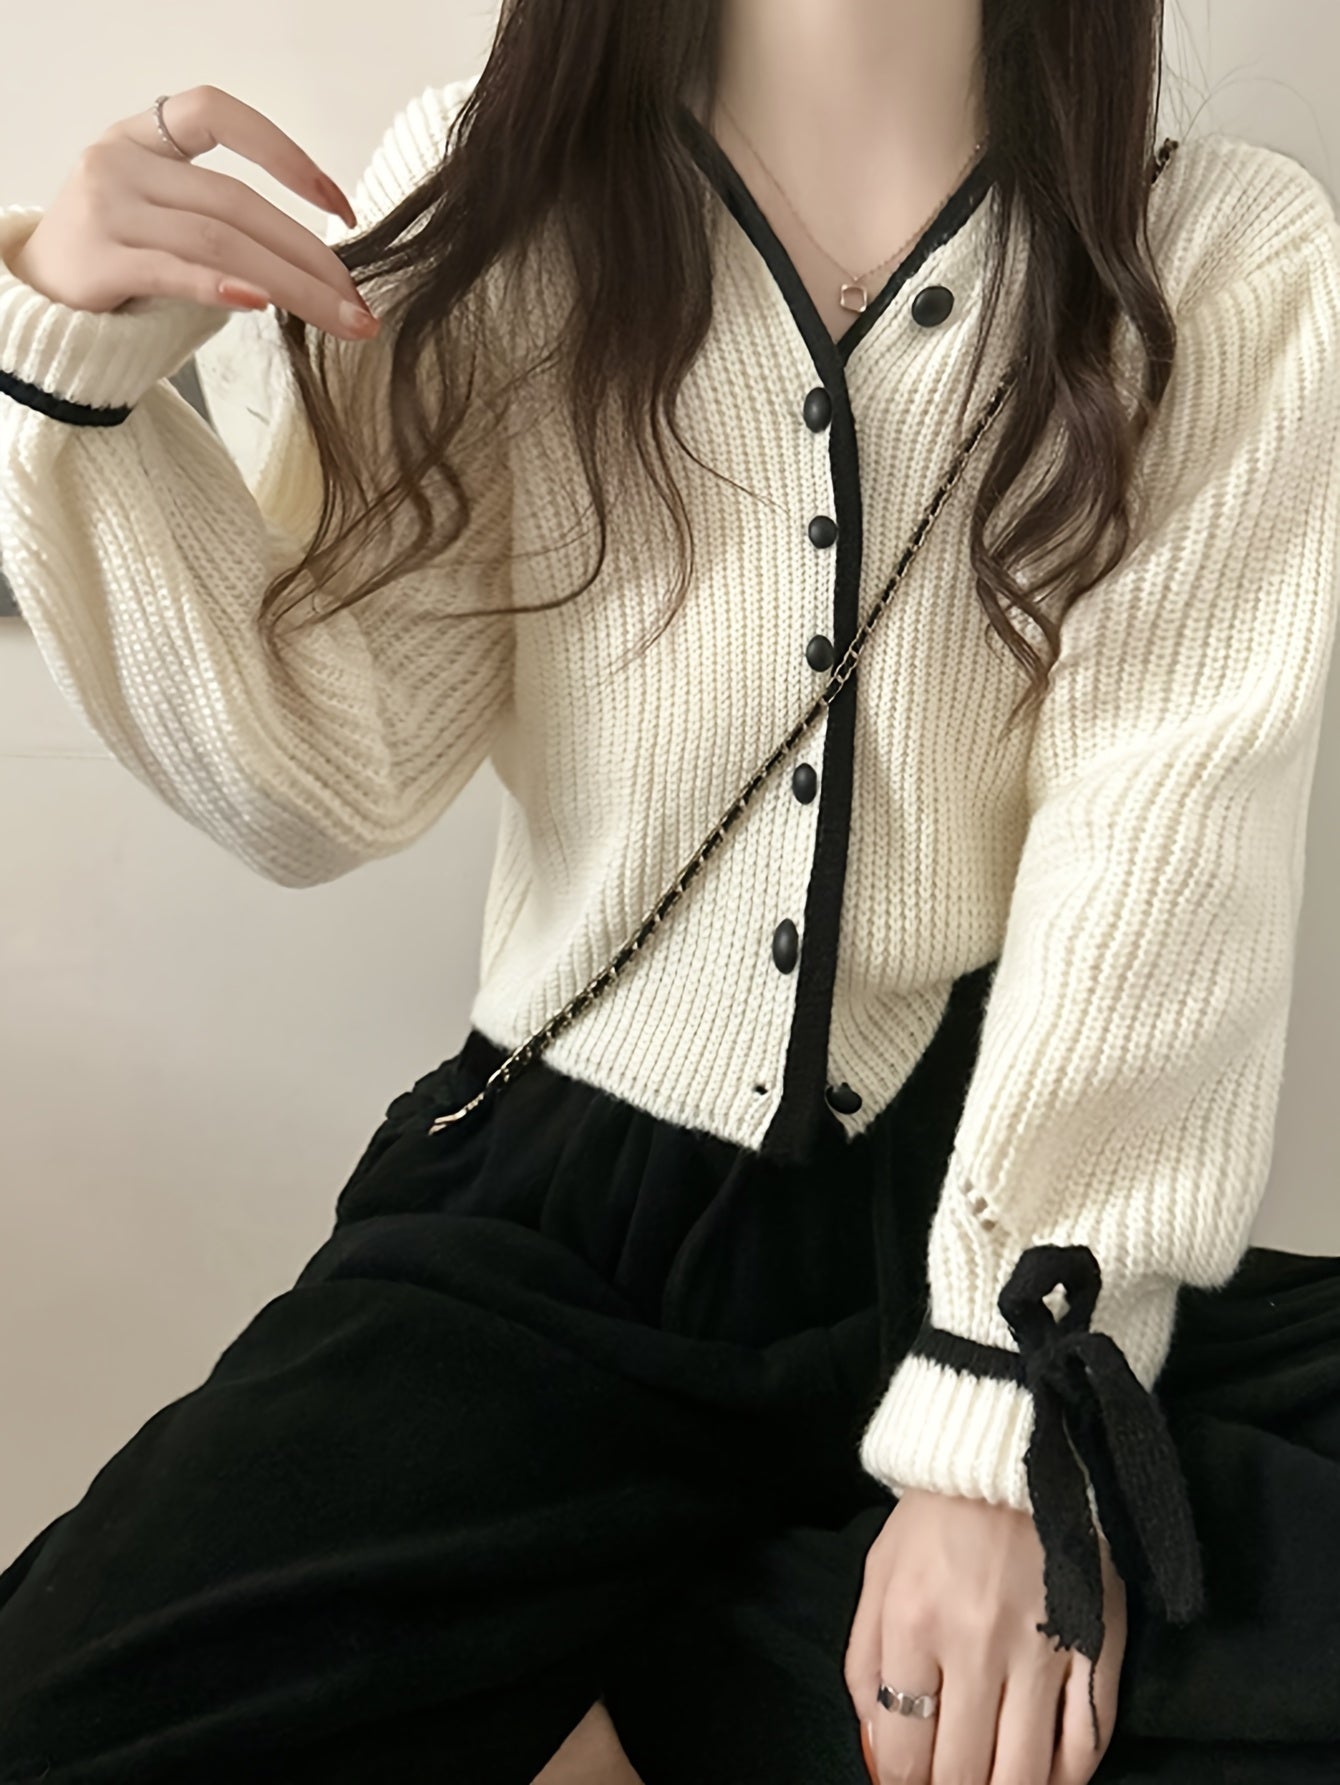 Antmvs Lace Up Button Down Knit Cardigan, Casual V Neck Long Sleeve Fashion Sweater, Women's Clothing